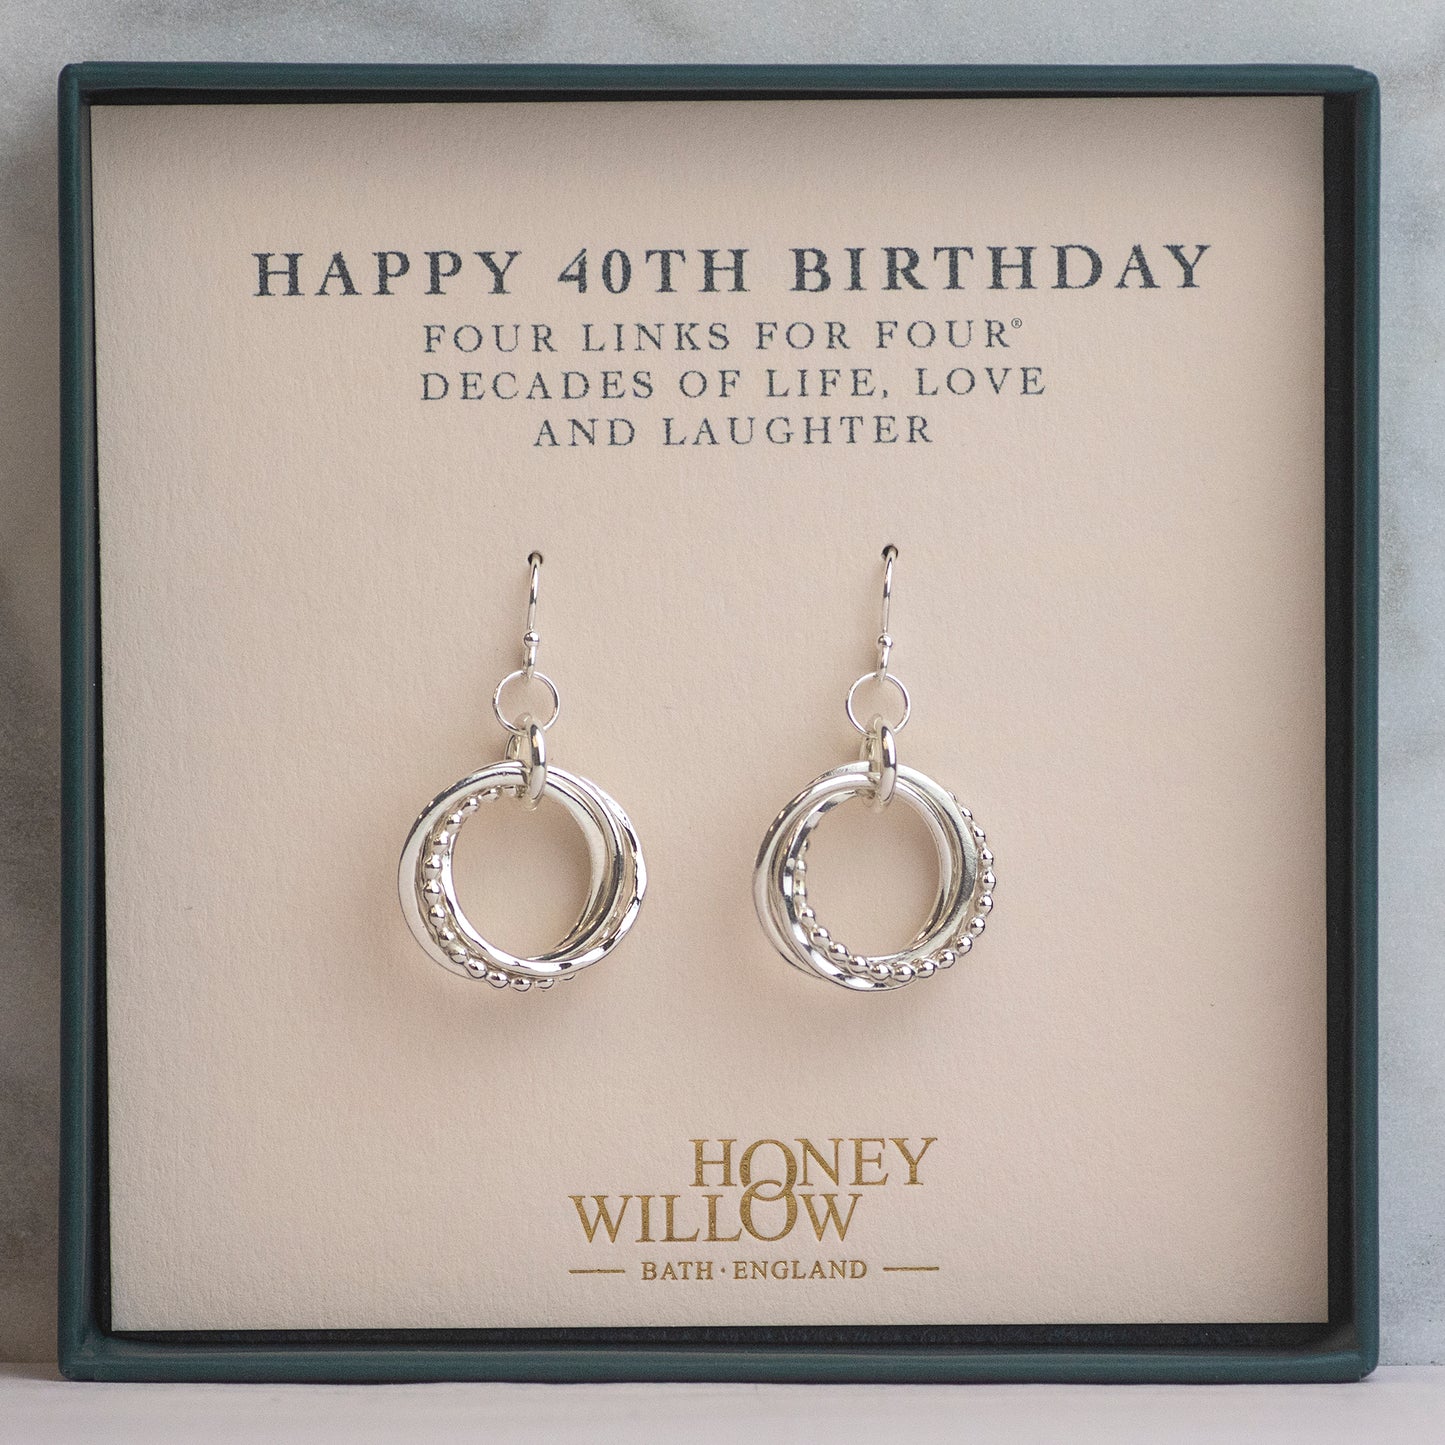 40th Birthday Earrings - The Original 4 Links for 4 Decades Earrings - Petite Silver